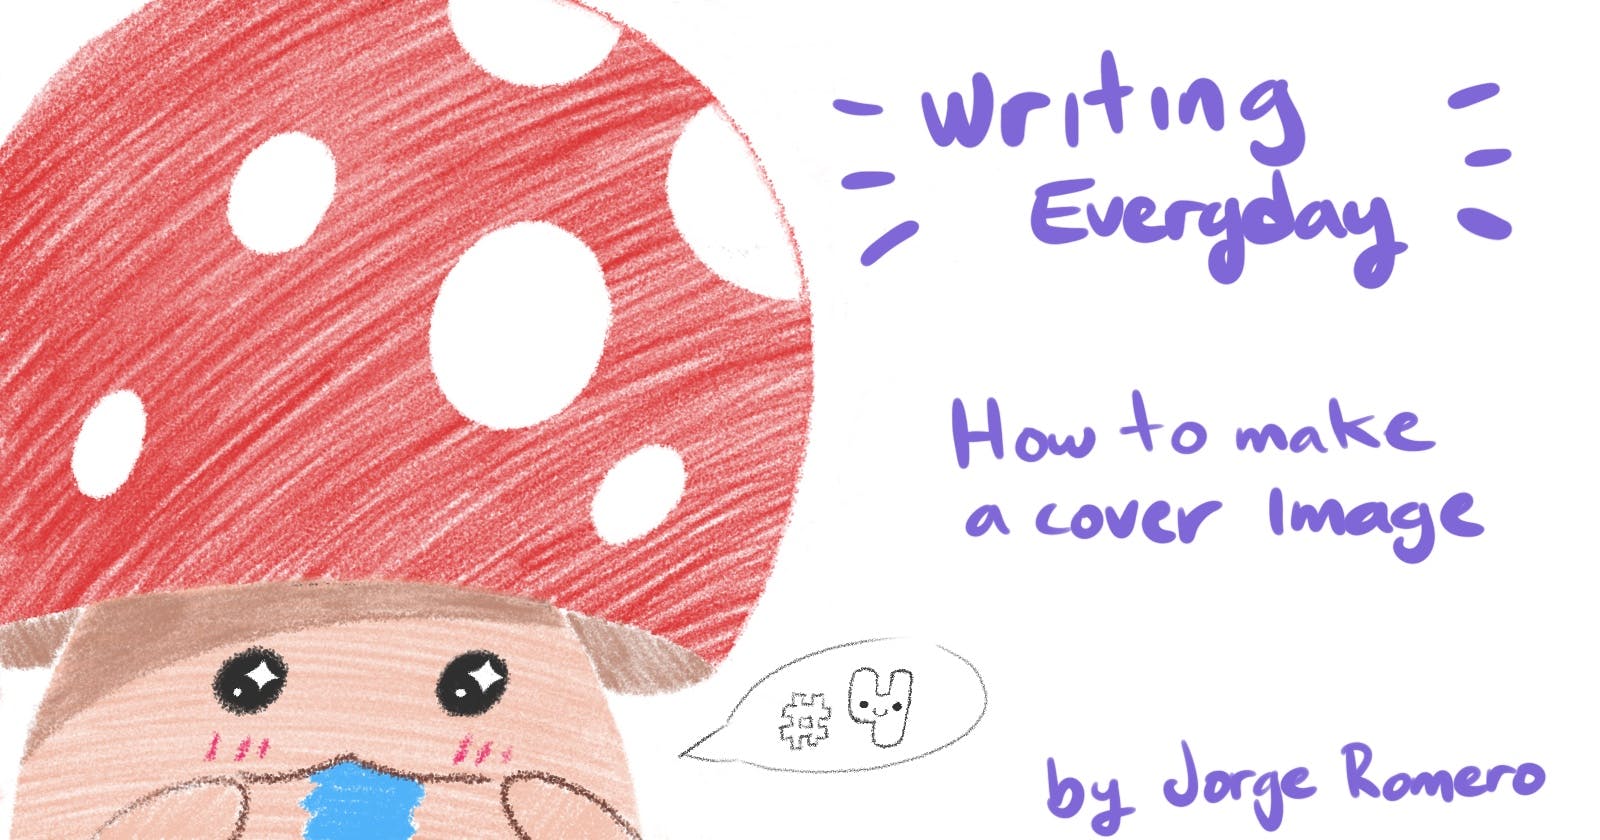 How to make a cover image